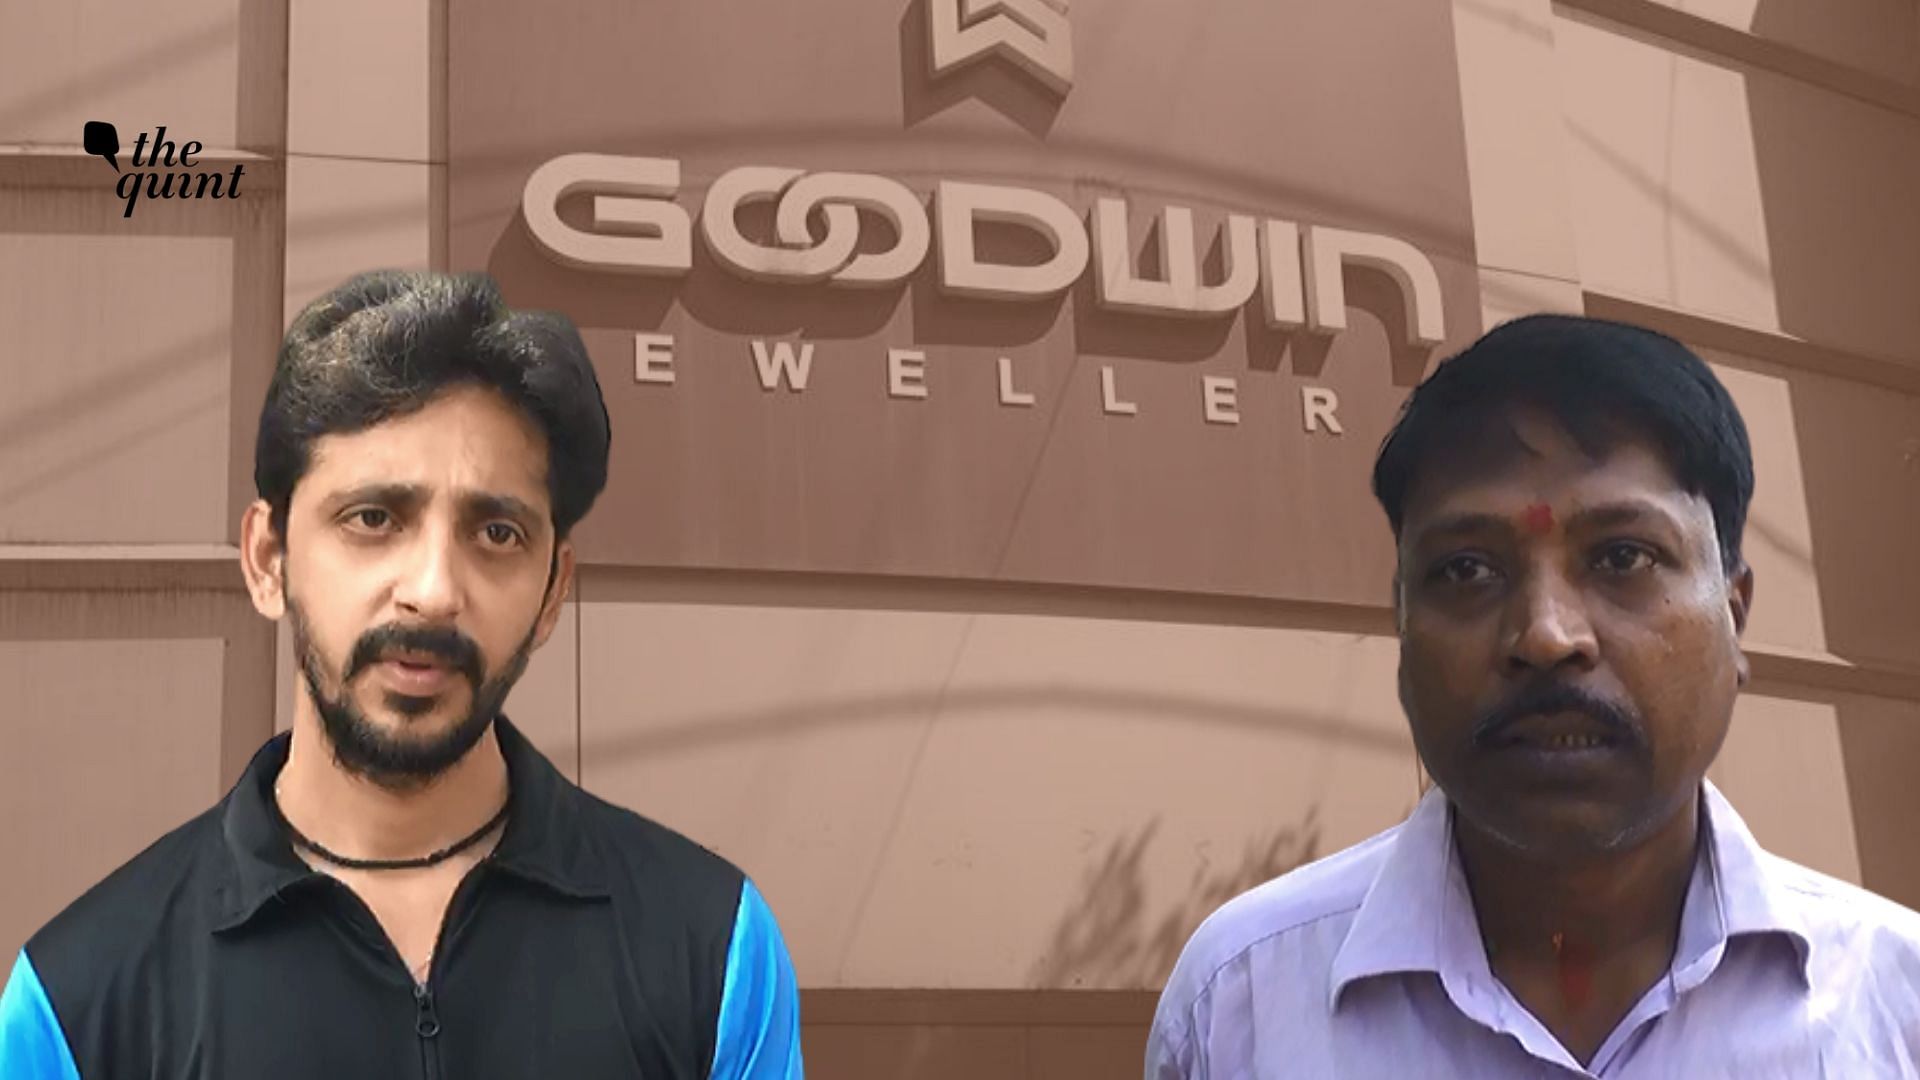 Customers of Goodwin jewelers narrate their ordeal to The Quint, expressing disbelief over the owners’ assurances.